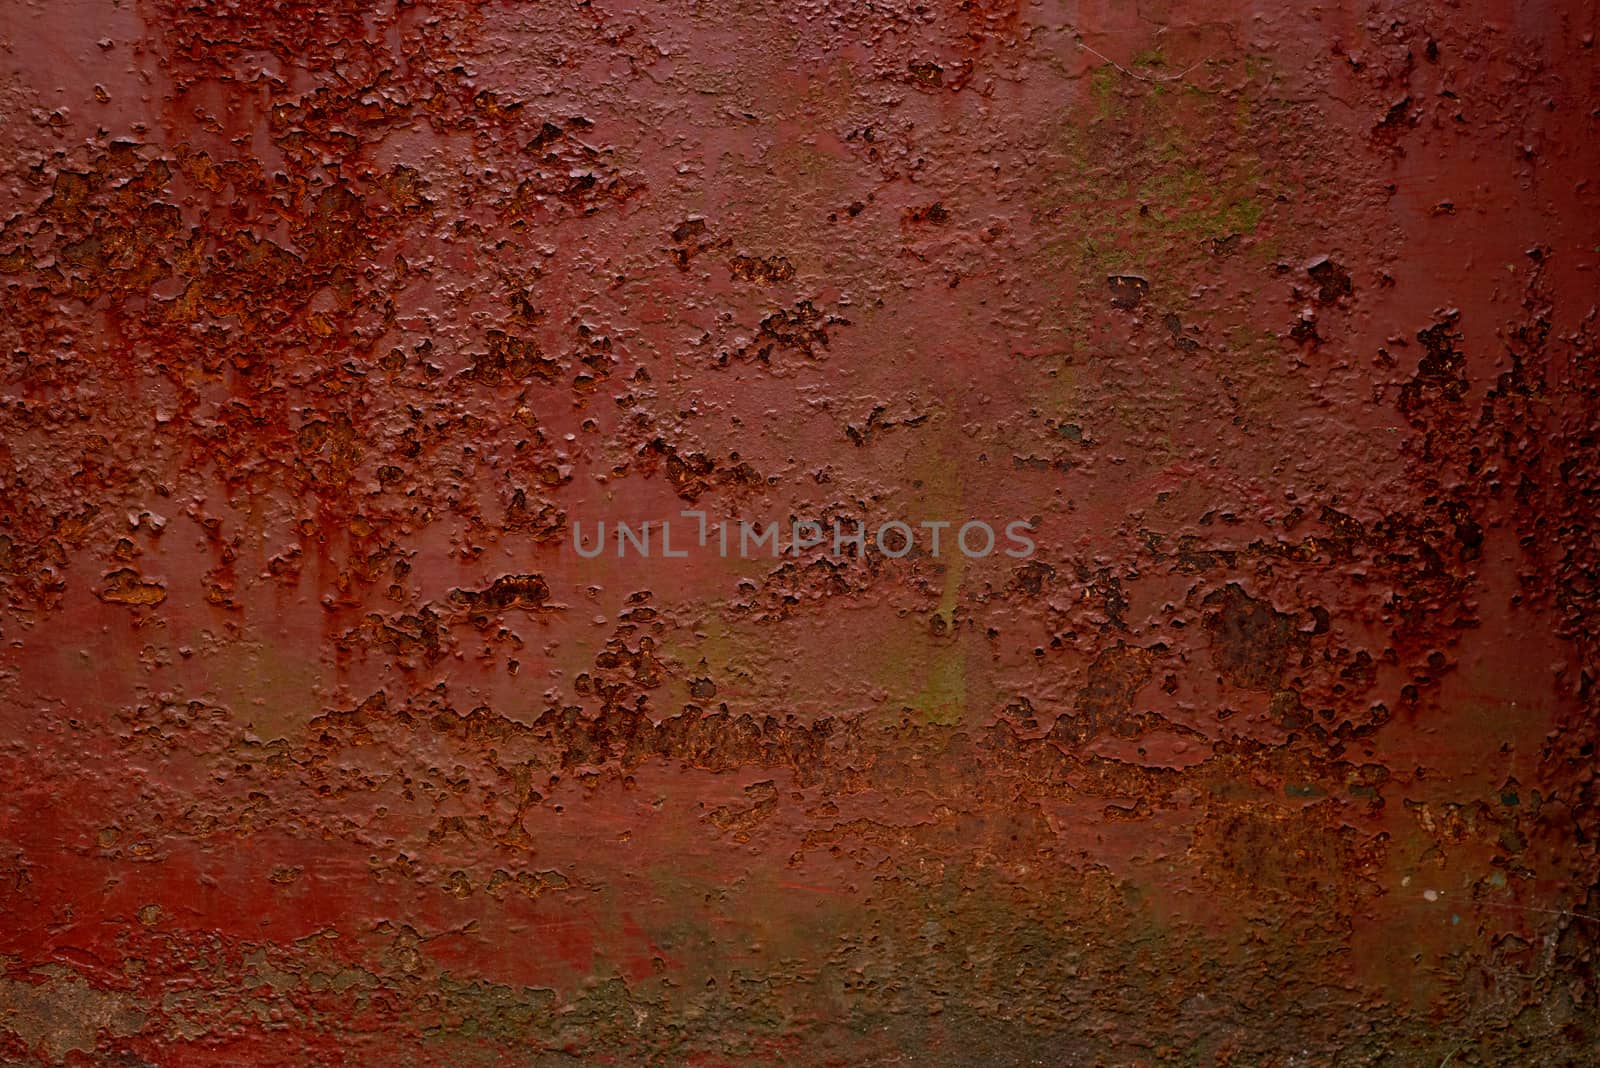 Abstract colorful image painted in red on an outdoor rotten metal by gonzalobell